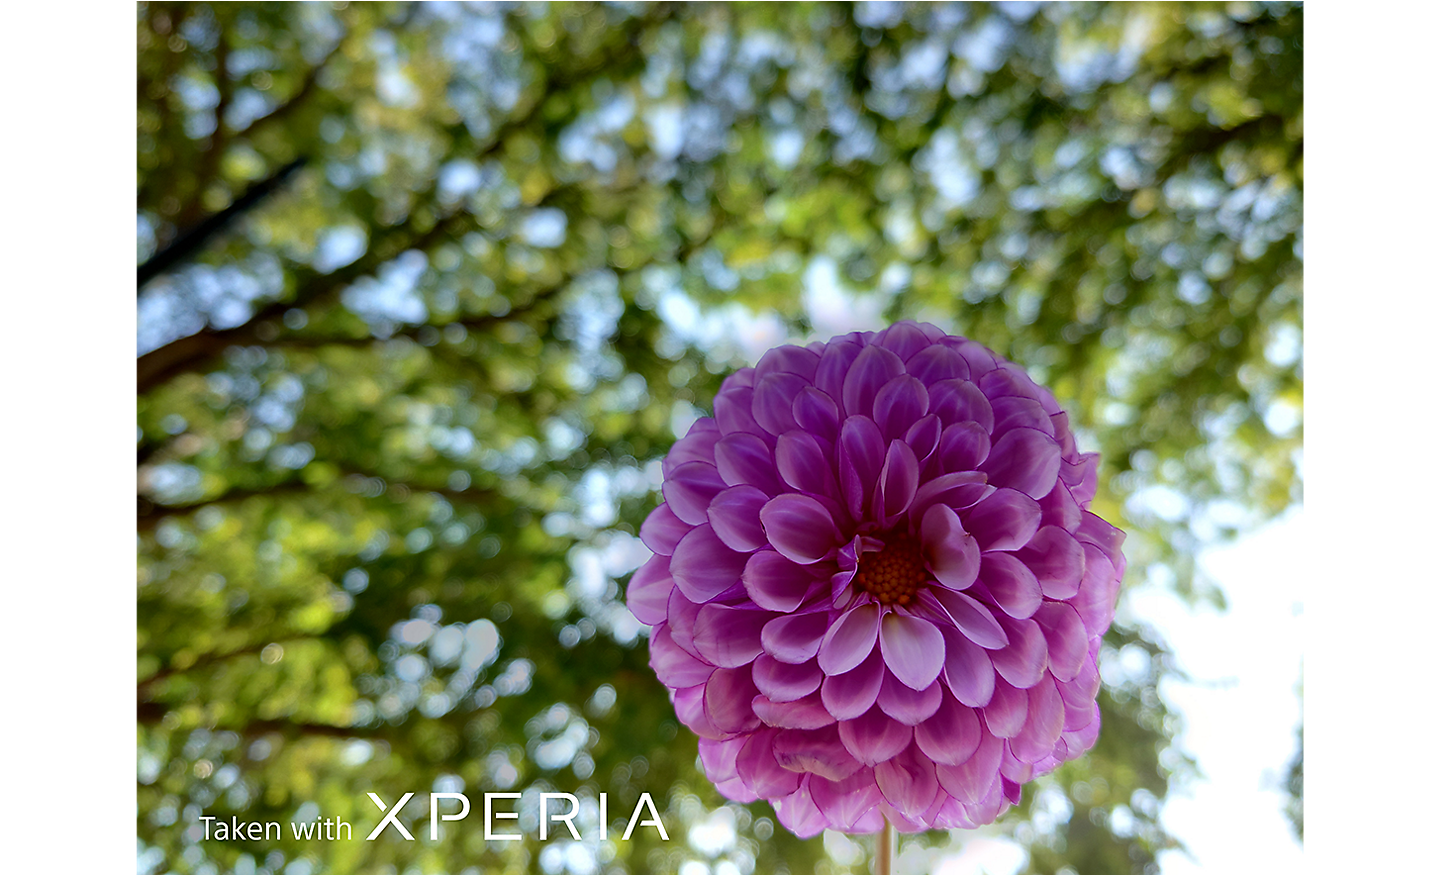 Close-up of a pink flower against a backdrop of leafy trees. Text reads "Taken with XPERIA".